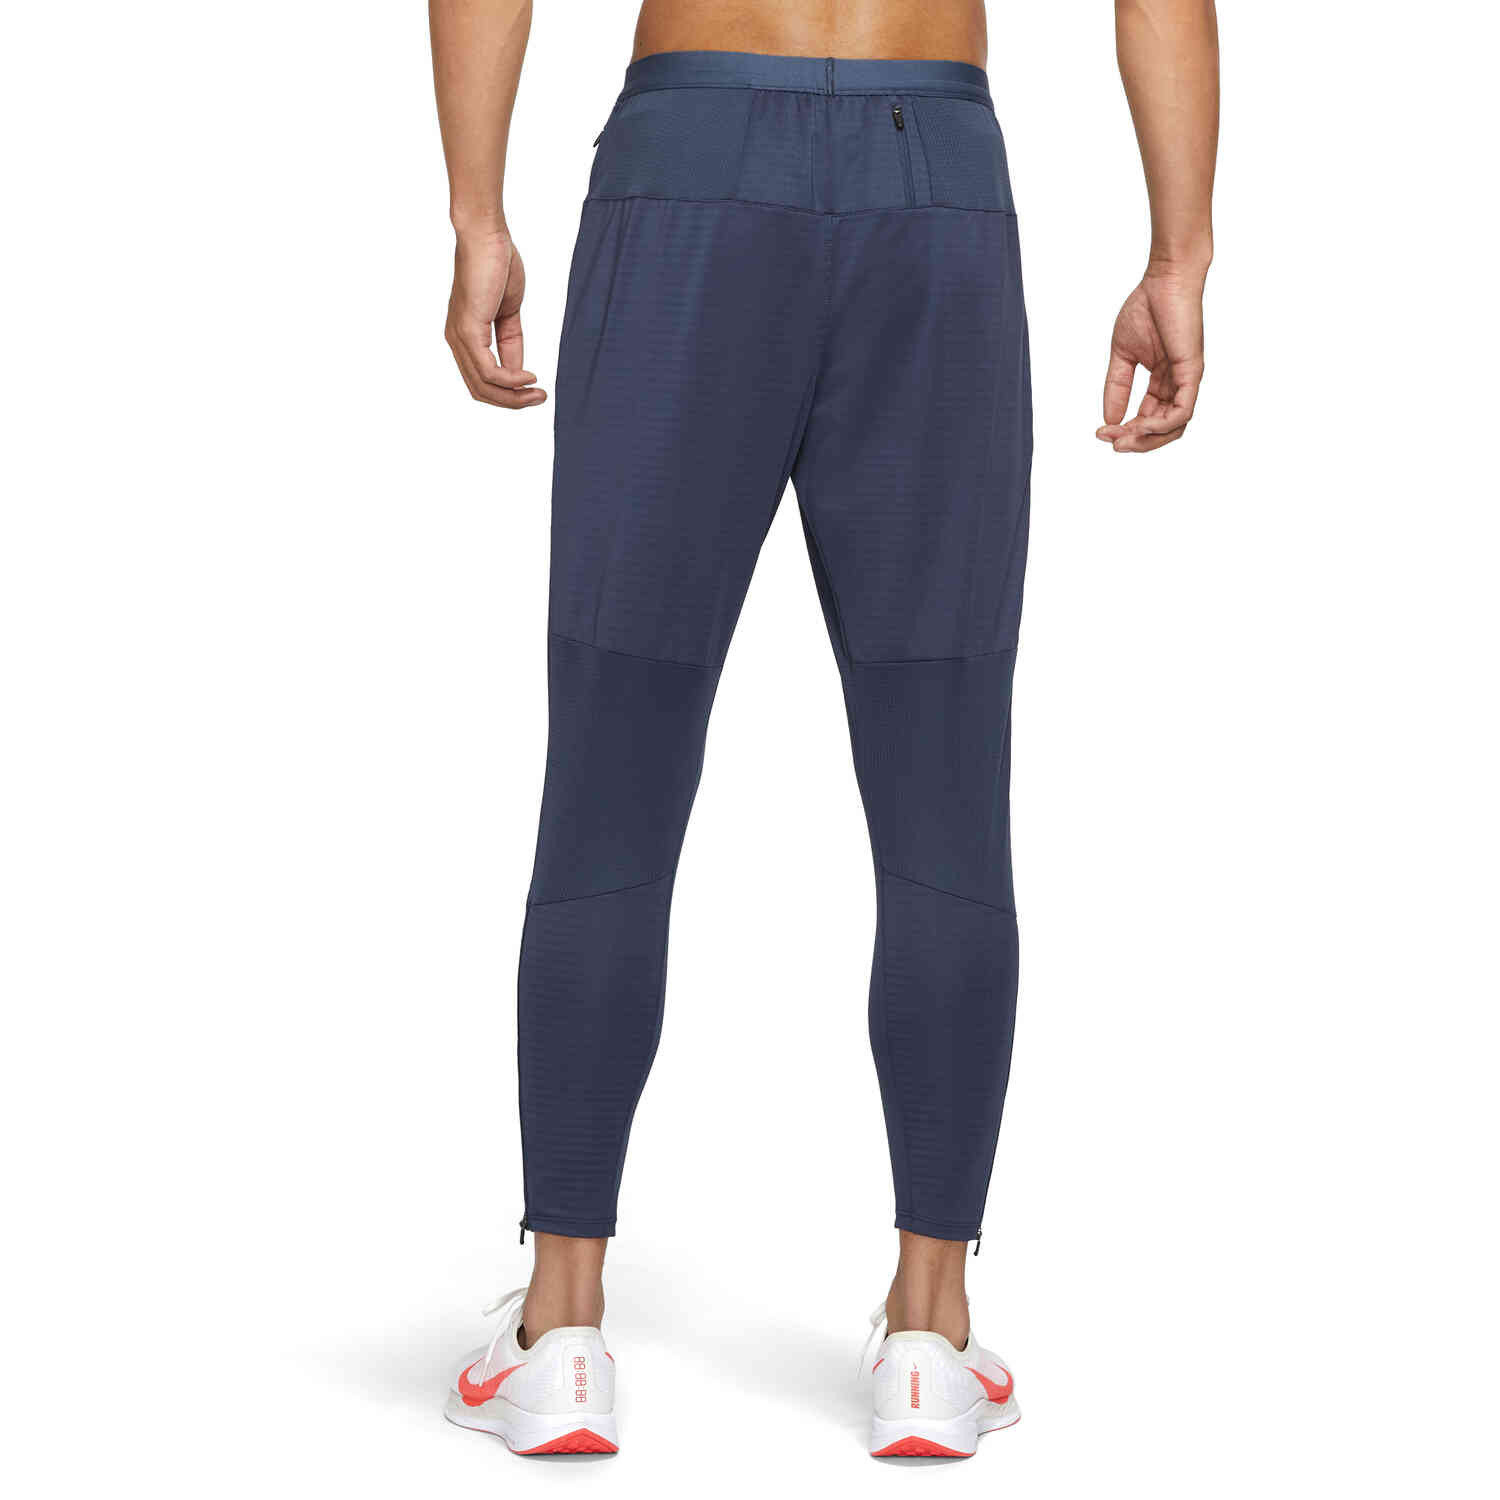 Nike Phenom Elite Knit Running Pants Men's Size L Cu5504 084 With Tags. for  sale online